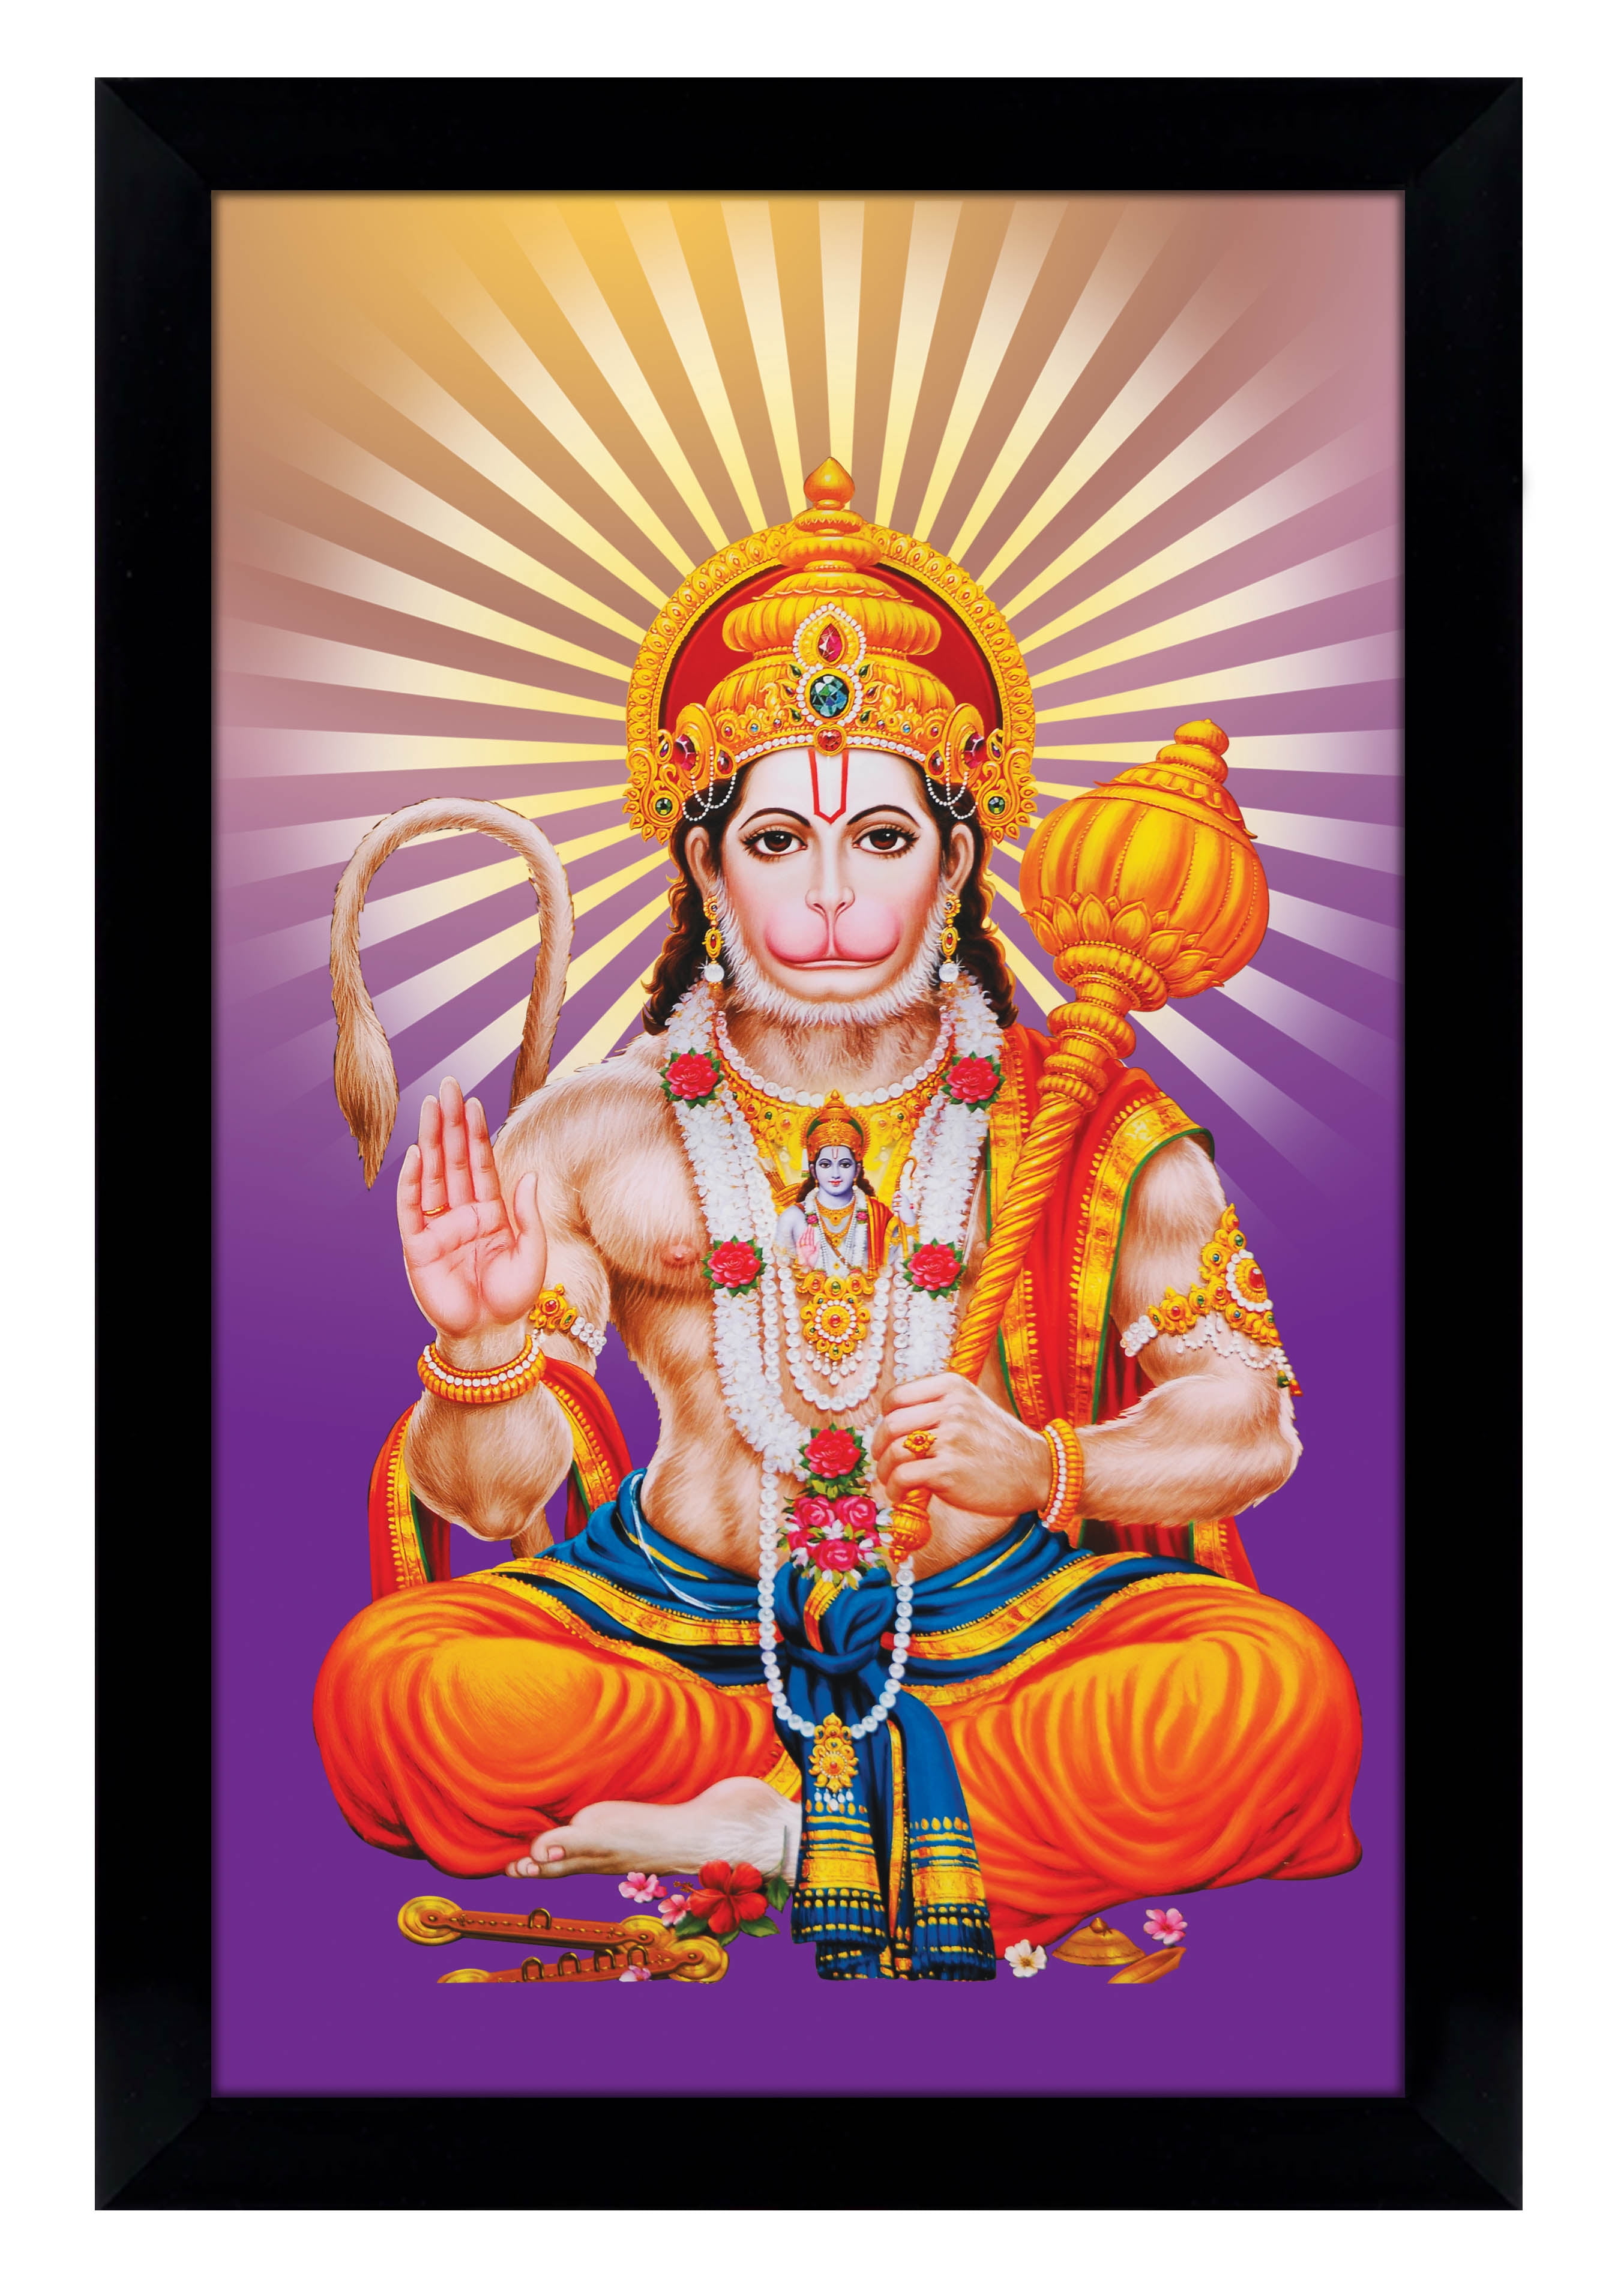 Details about   Big Size Wall Door Poster Indian Deity Poster Size 4 X 2 Foot Tapestry 